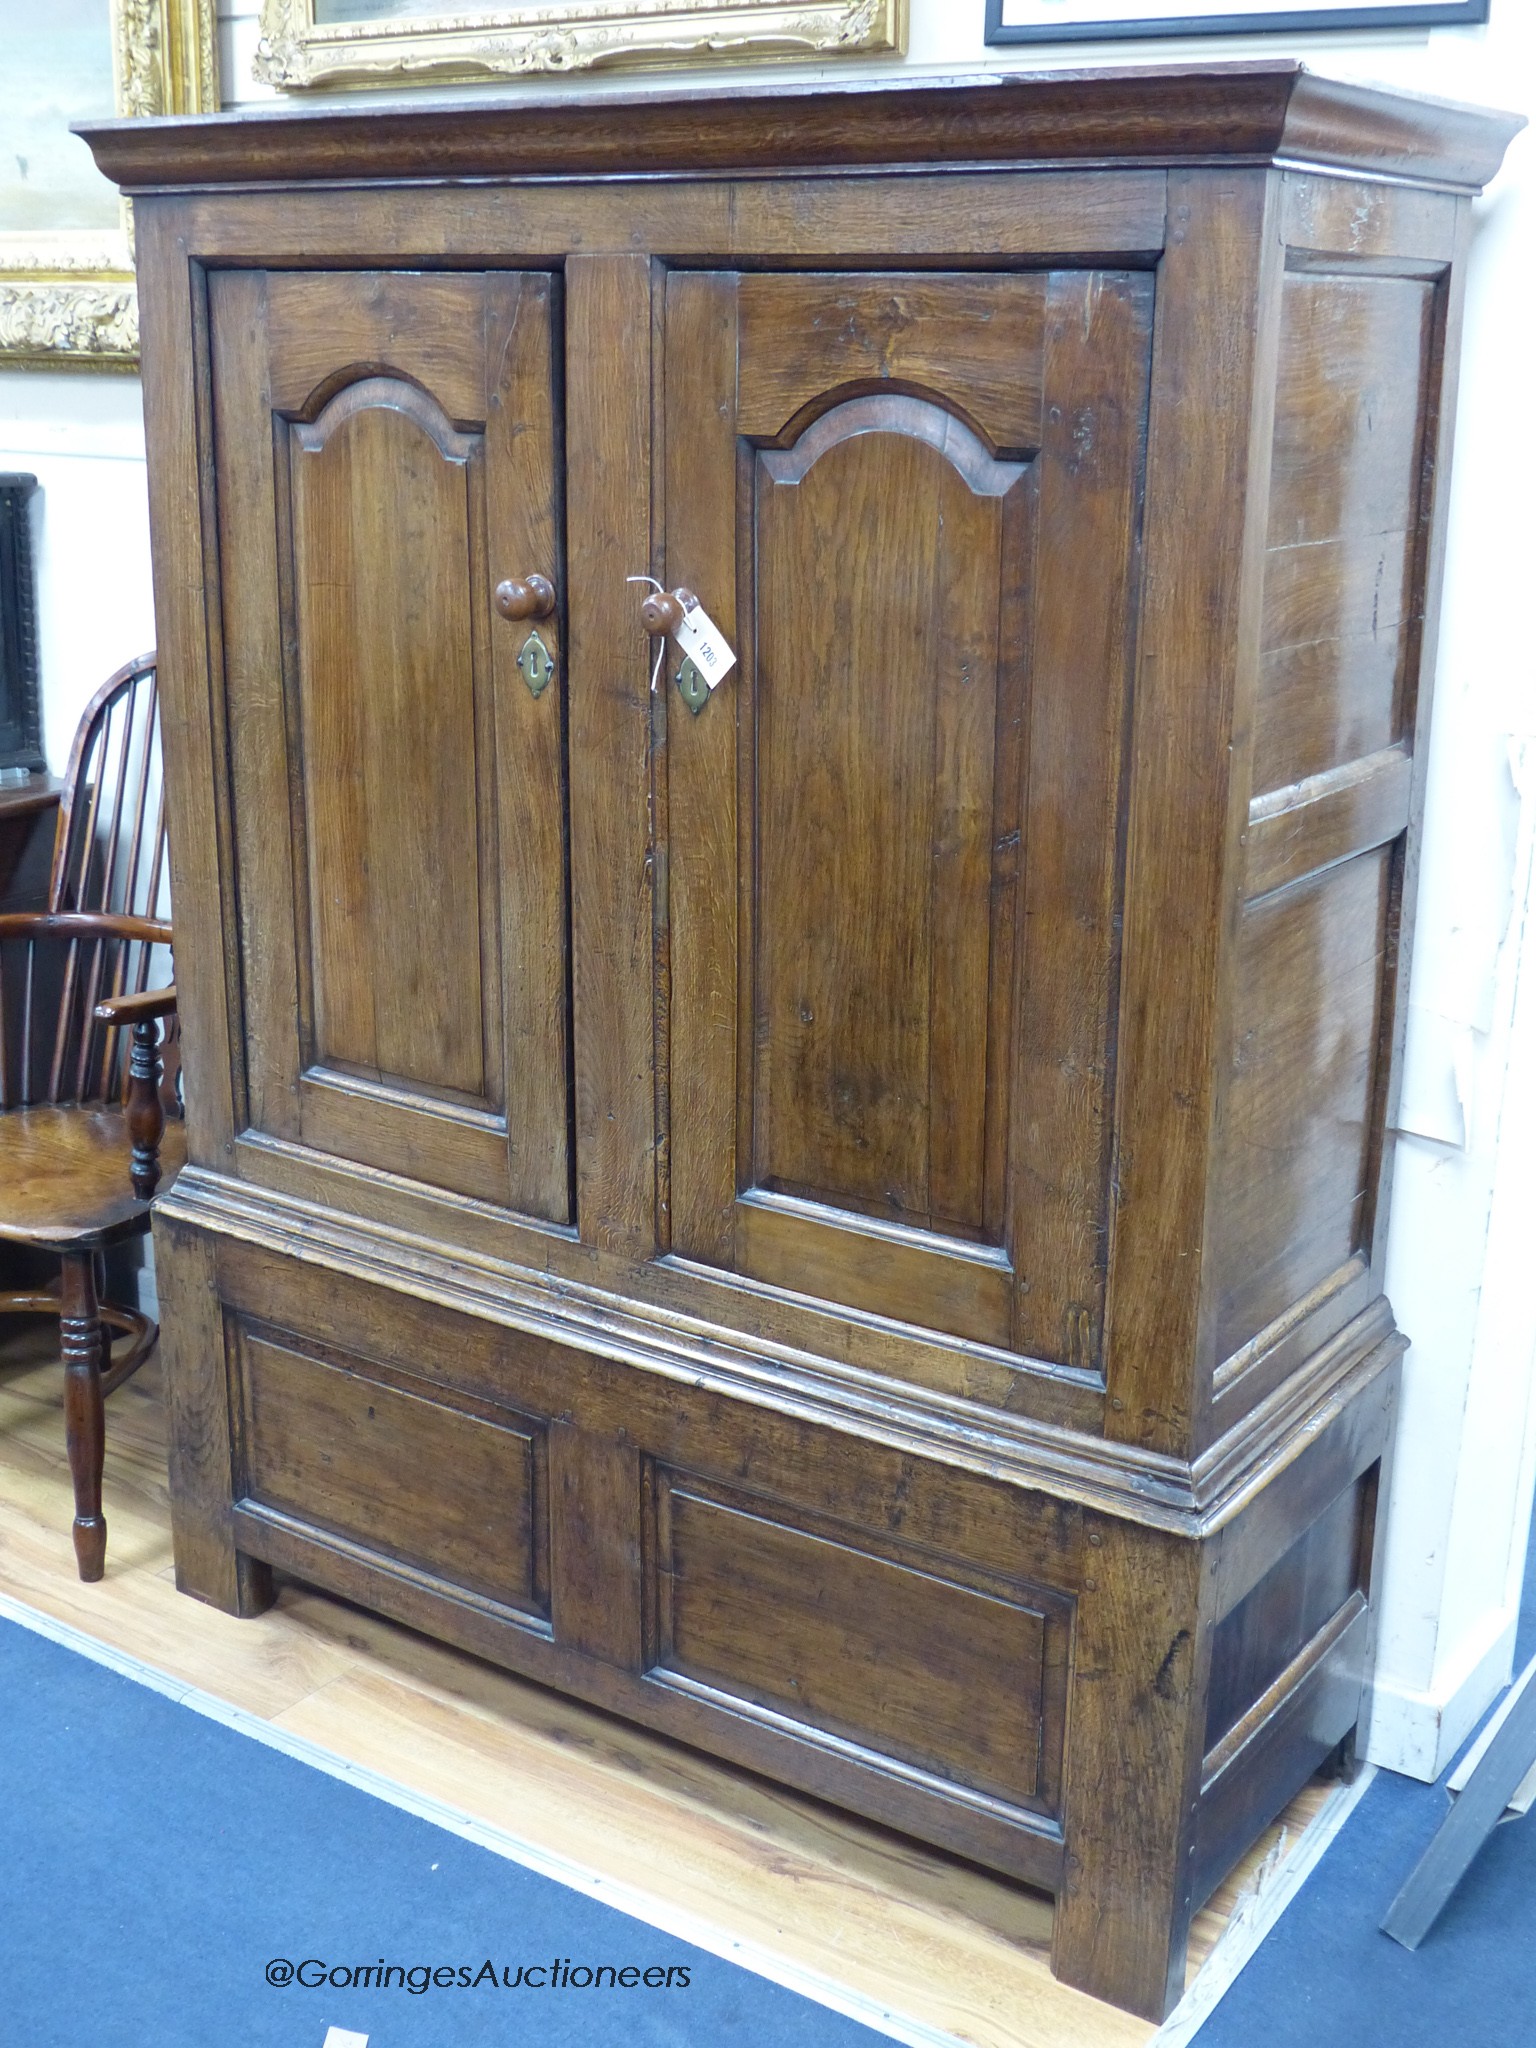 An early 18th century oak cupboard fitted a pair of arched fielded panelled doors, width 130cm, depth 51cm, height 164cm